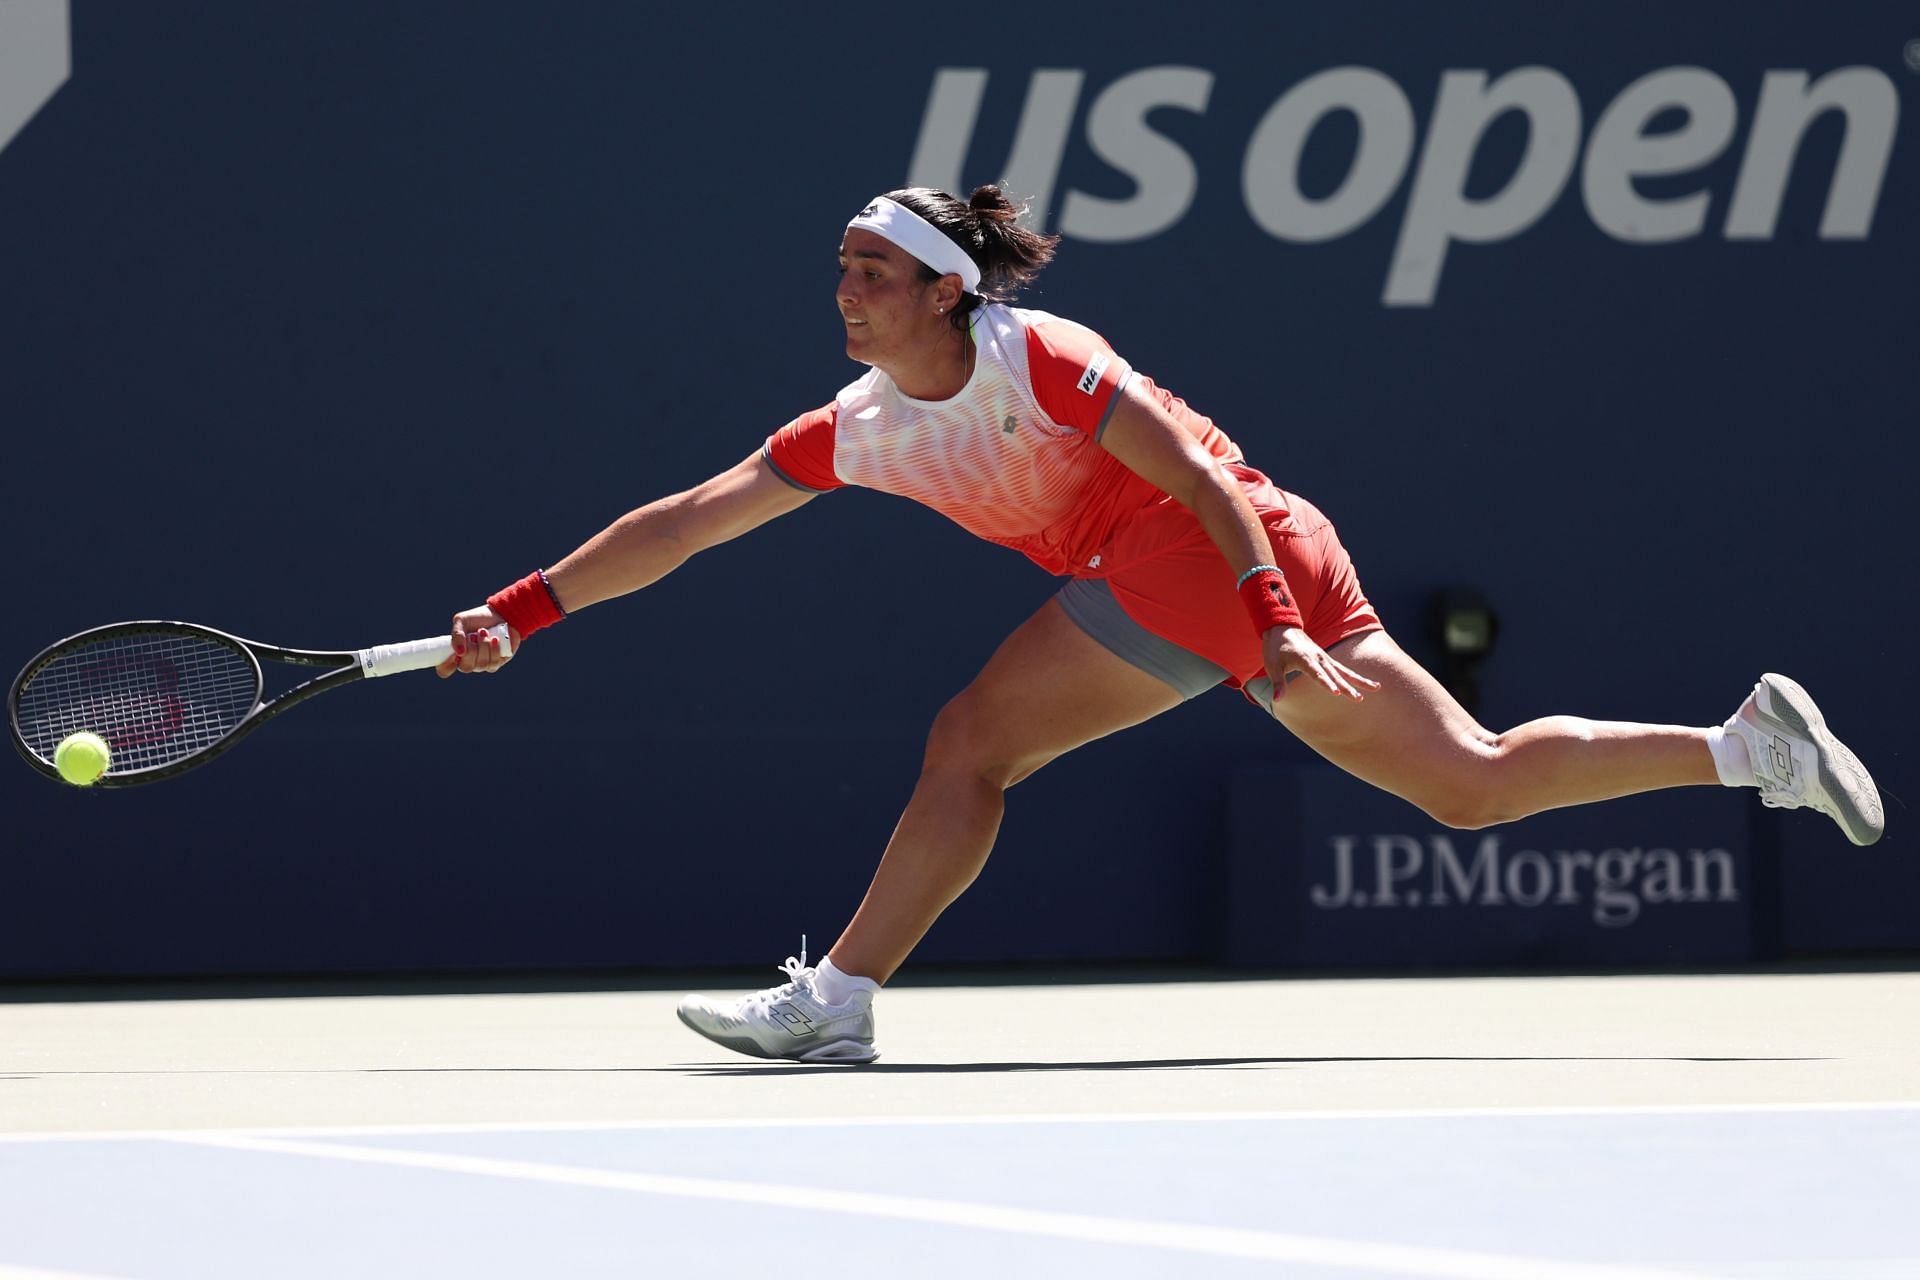 Ons Jabeur at the 2022 US Open - Day 5